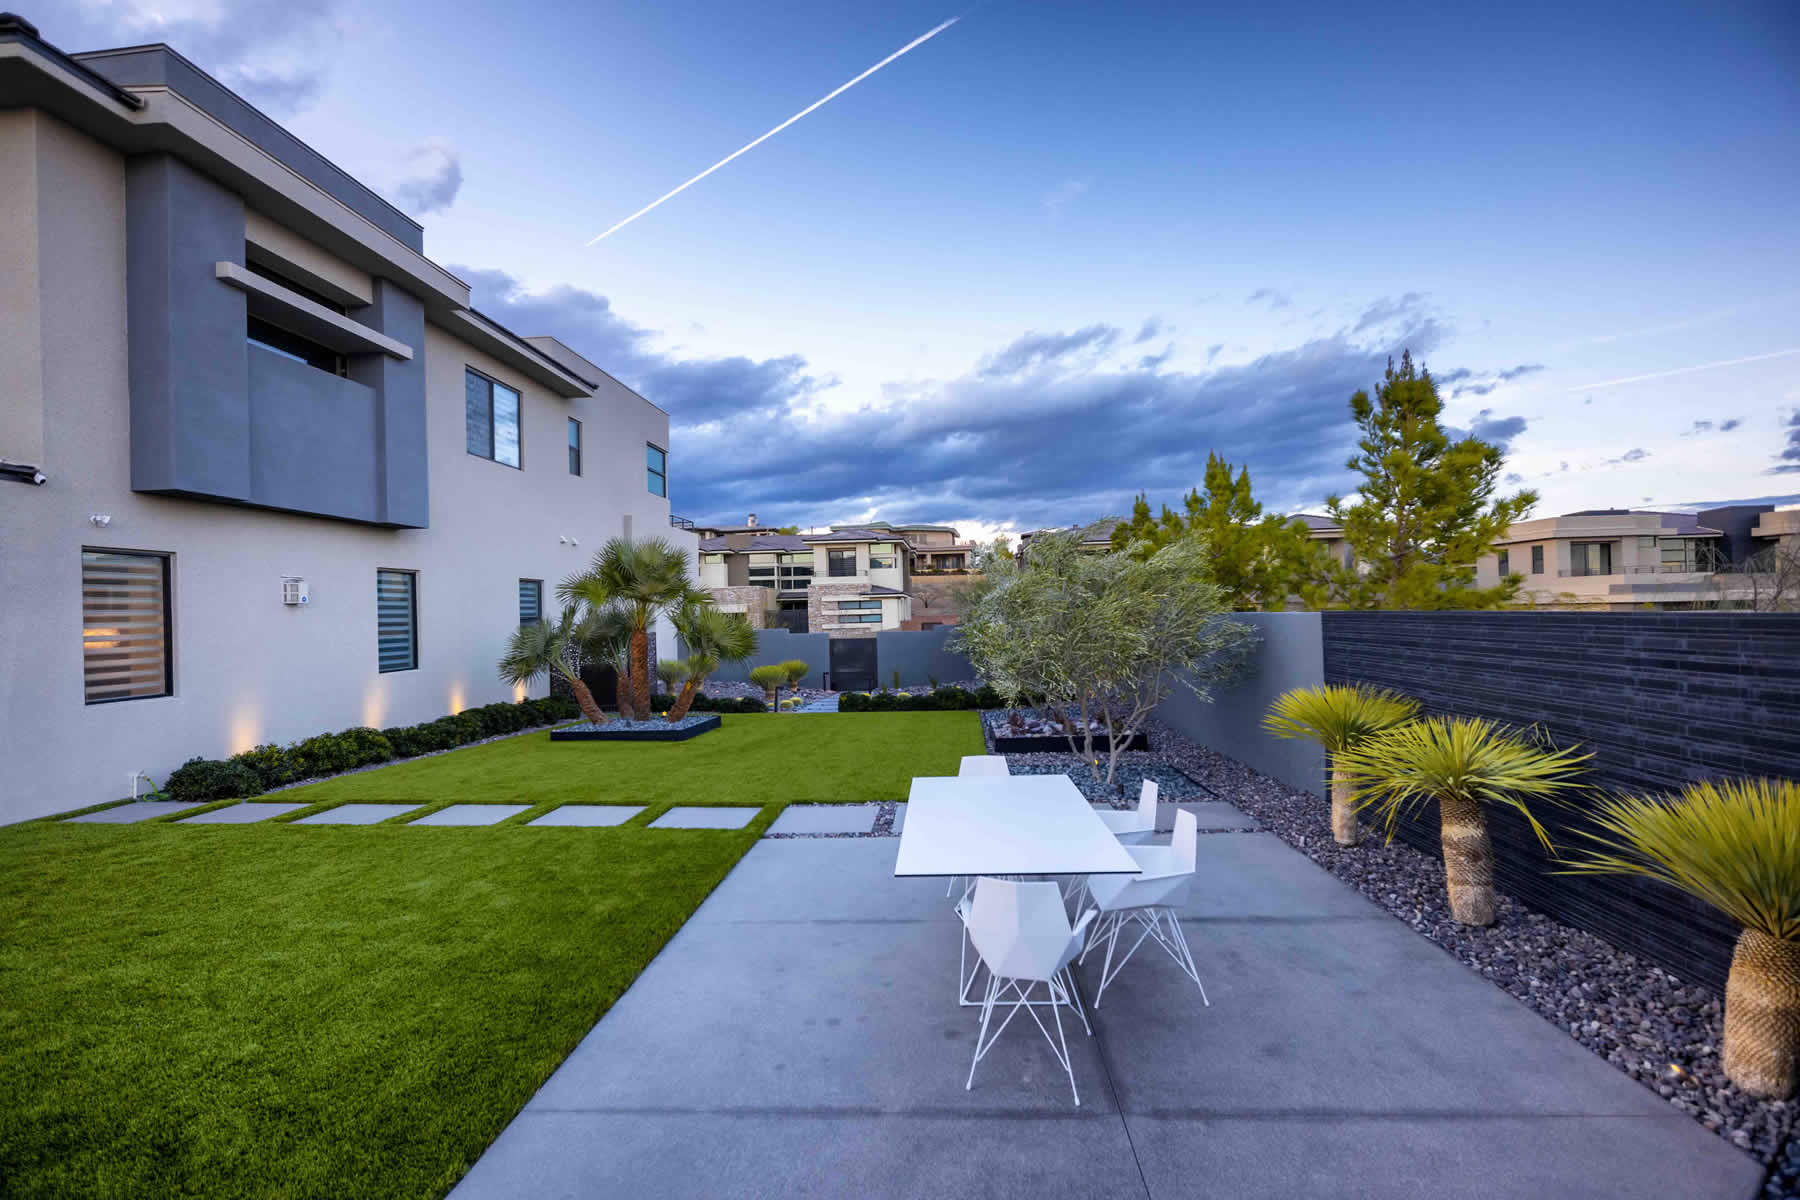 Commercial Landscape Architect serving Nevada and California